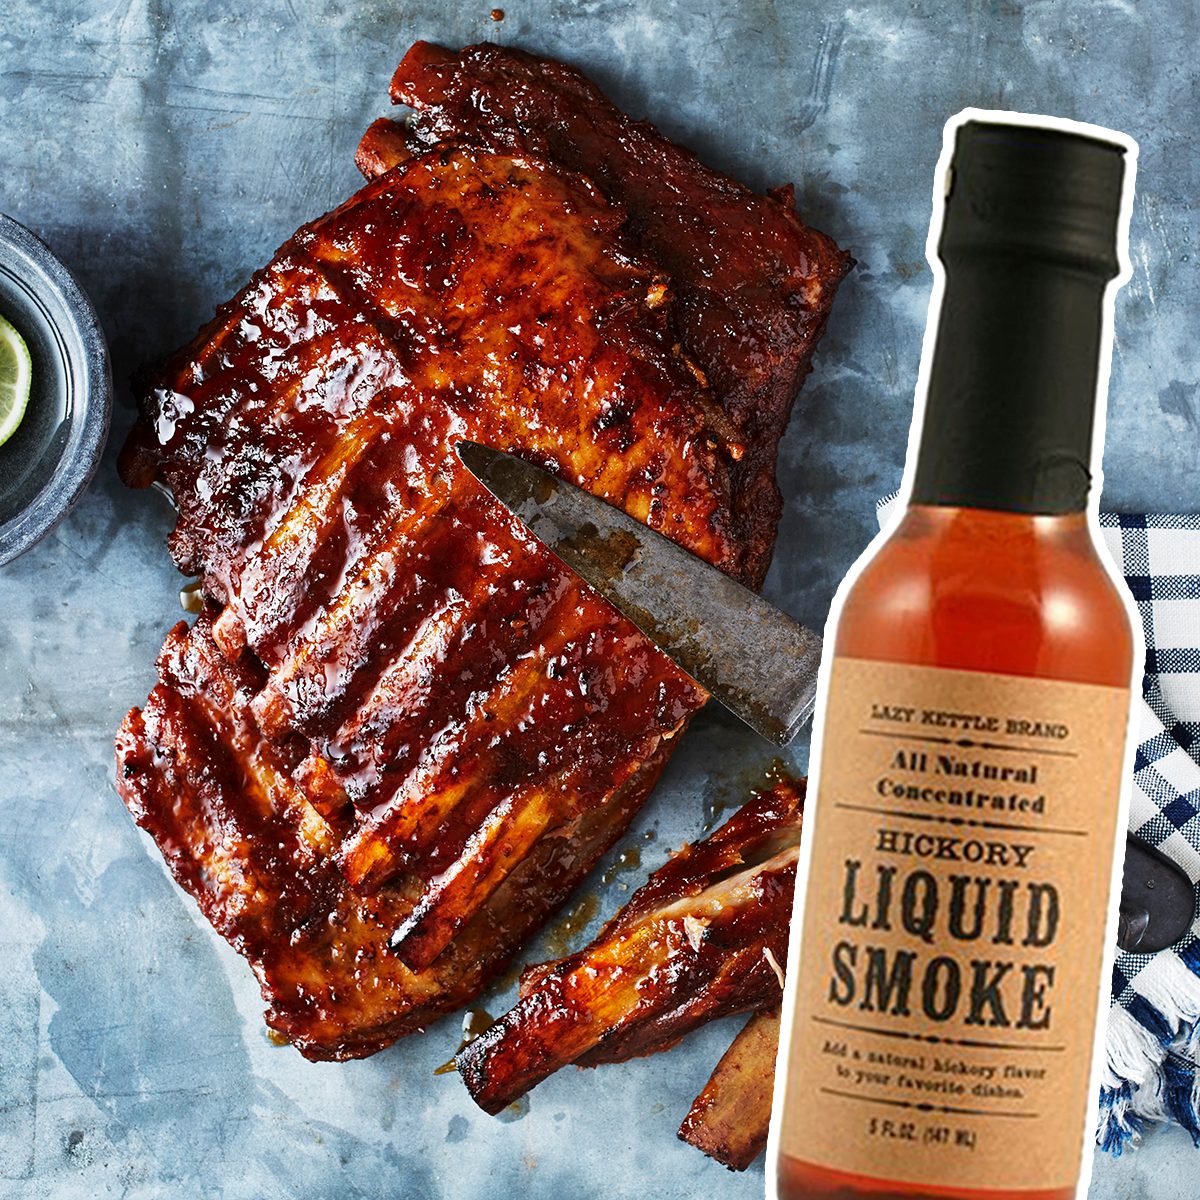 What Is Liquid Smoke and How Can You Use It?